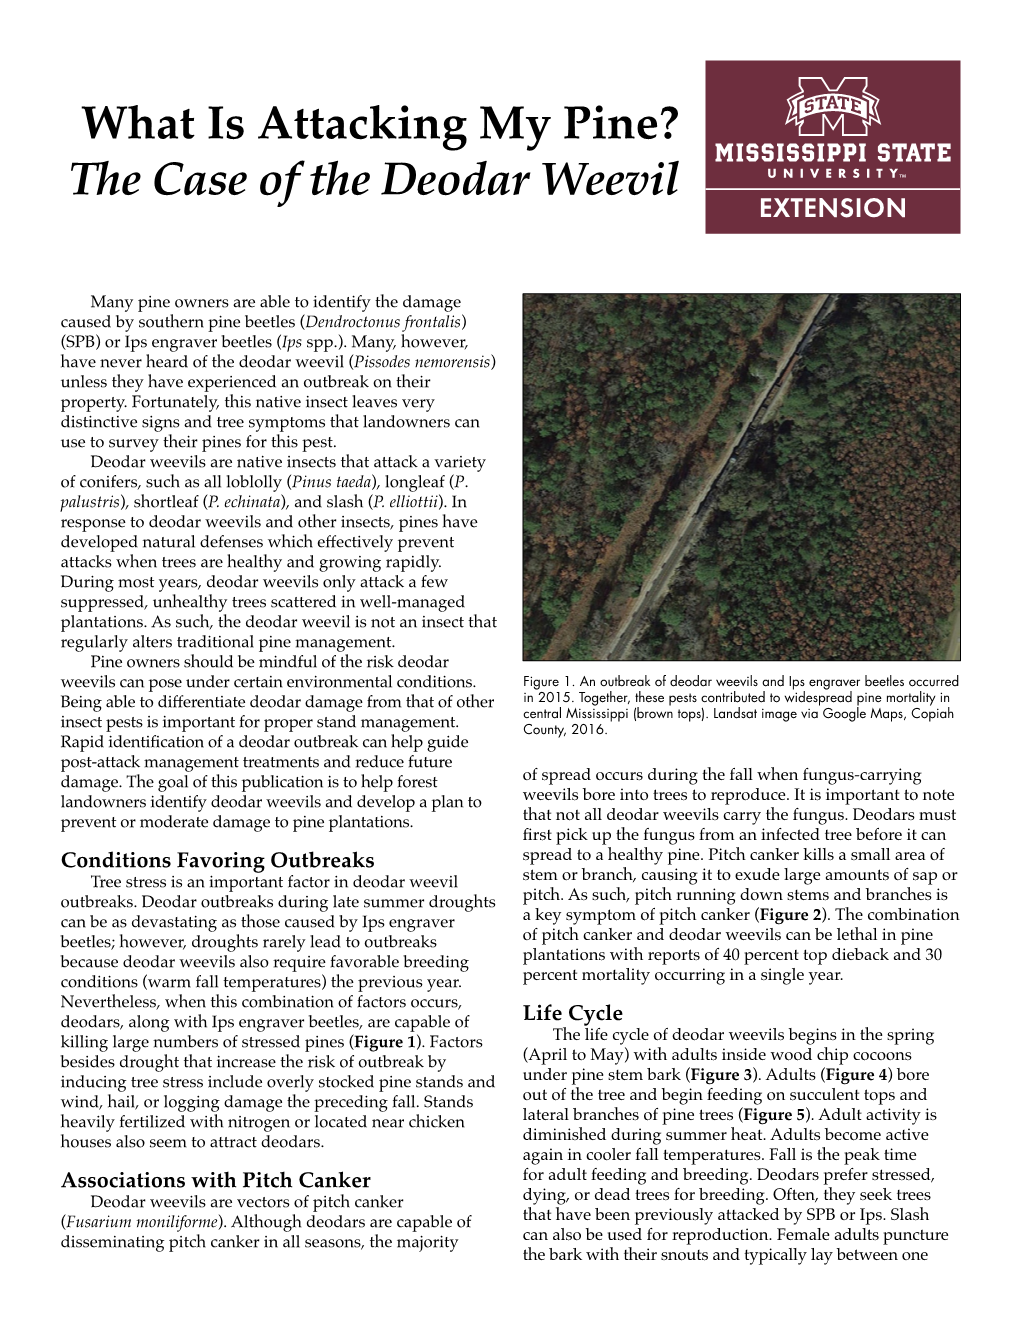 The Case of the Deodar Weevil